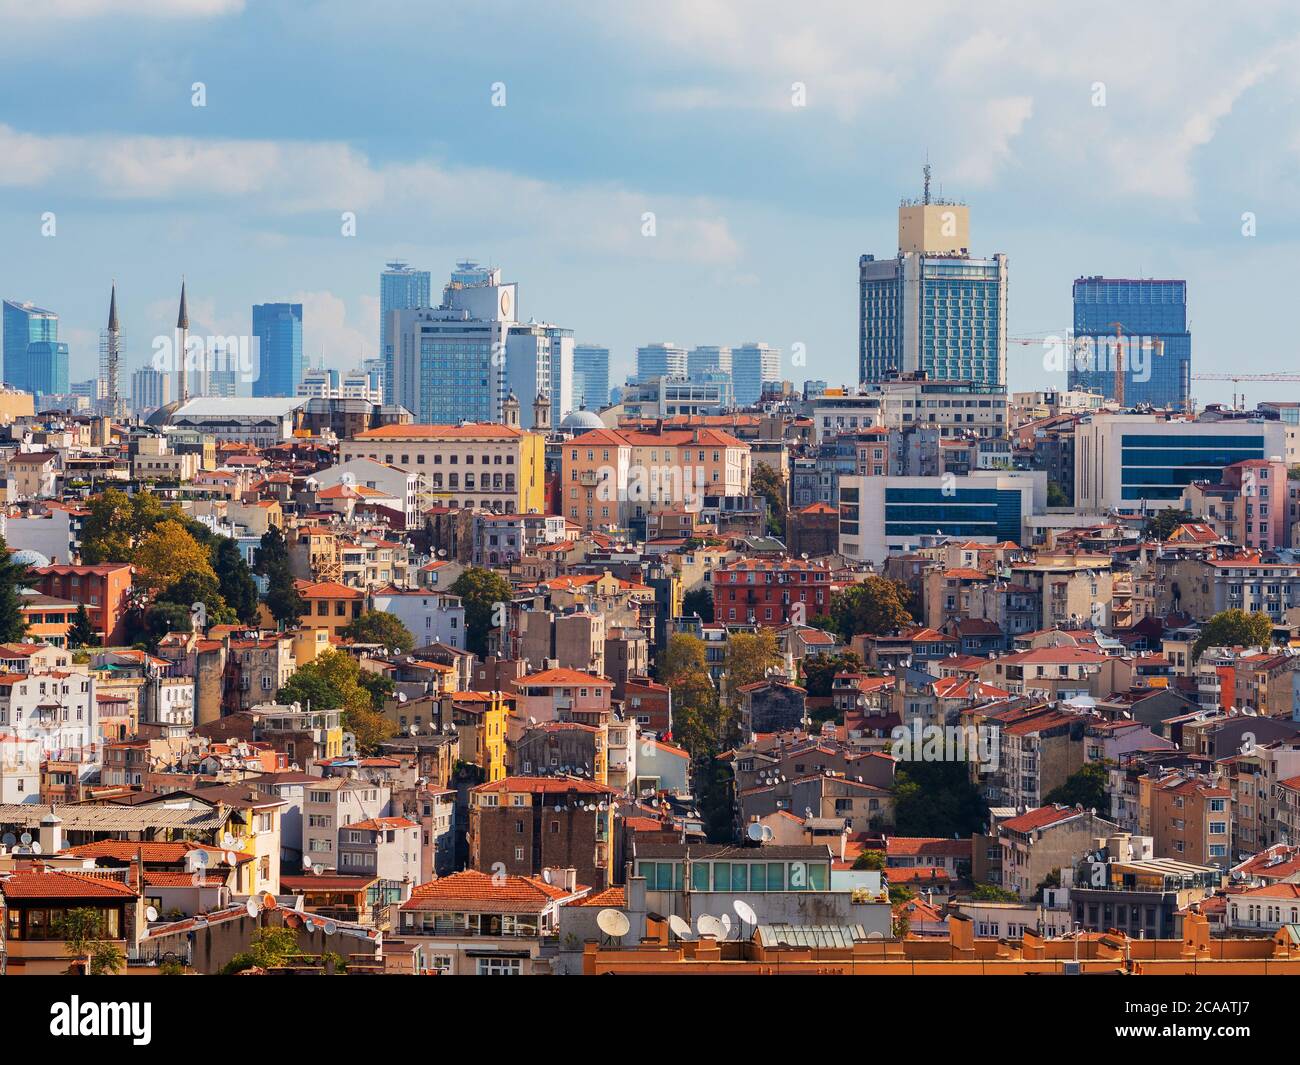 ISTANBUL, TURKEY - SEPTEMBER 21, 2019: Istanbul, city view, old low-rise buildings and modern houses together. Stock Photo